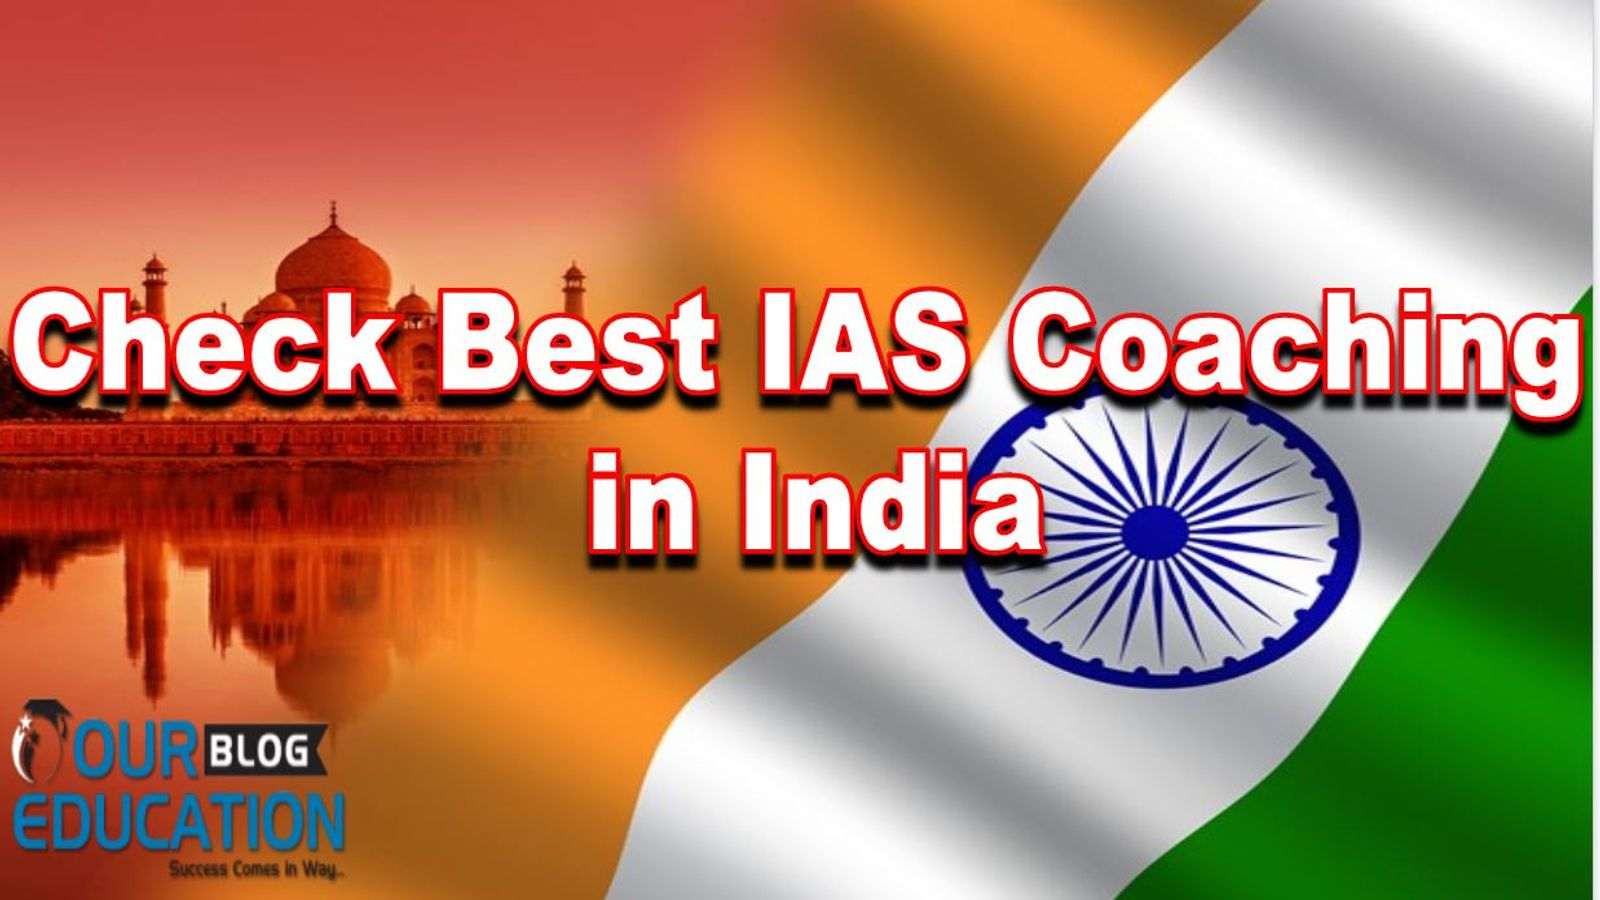 Best IAS Coaching for Civil Services in India